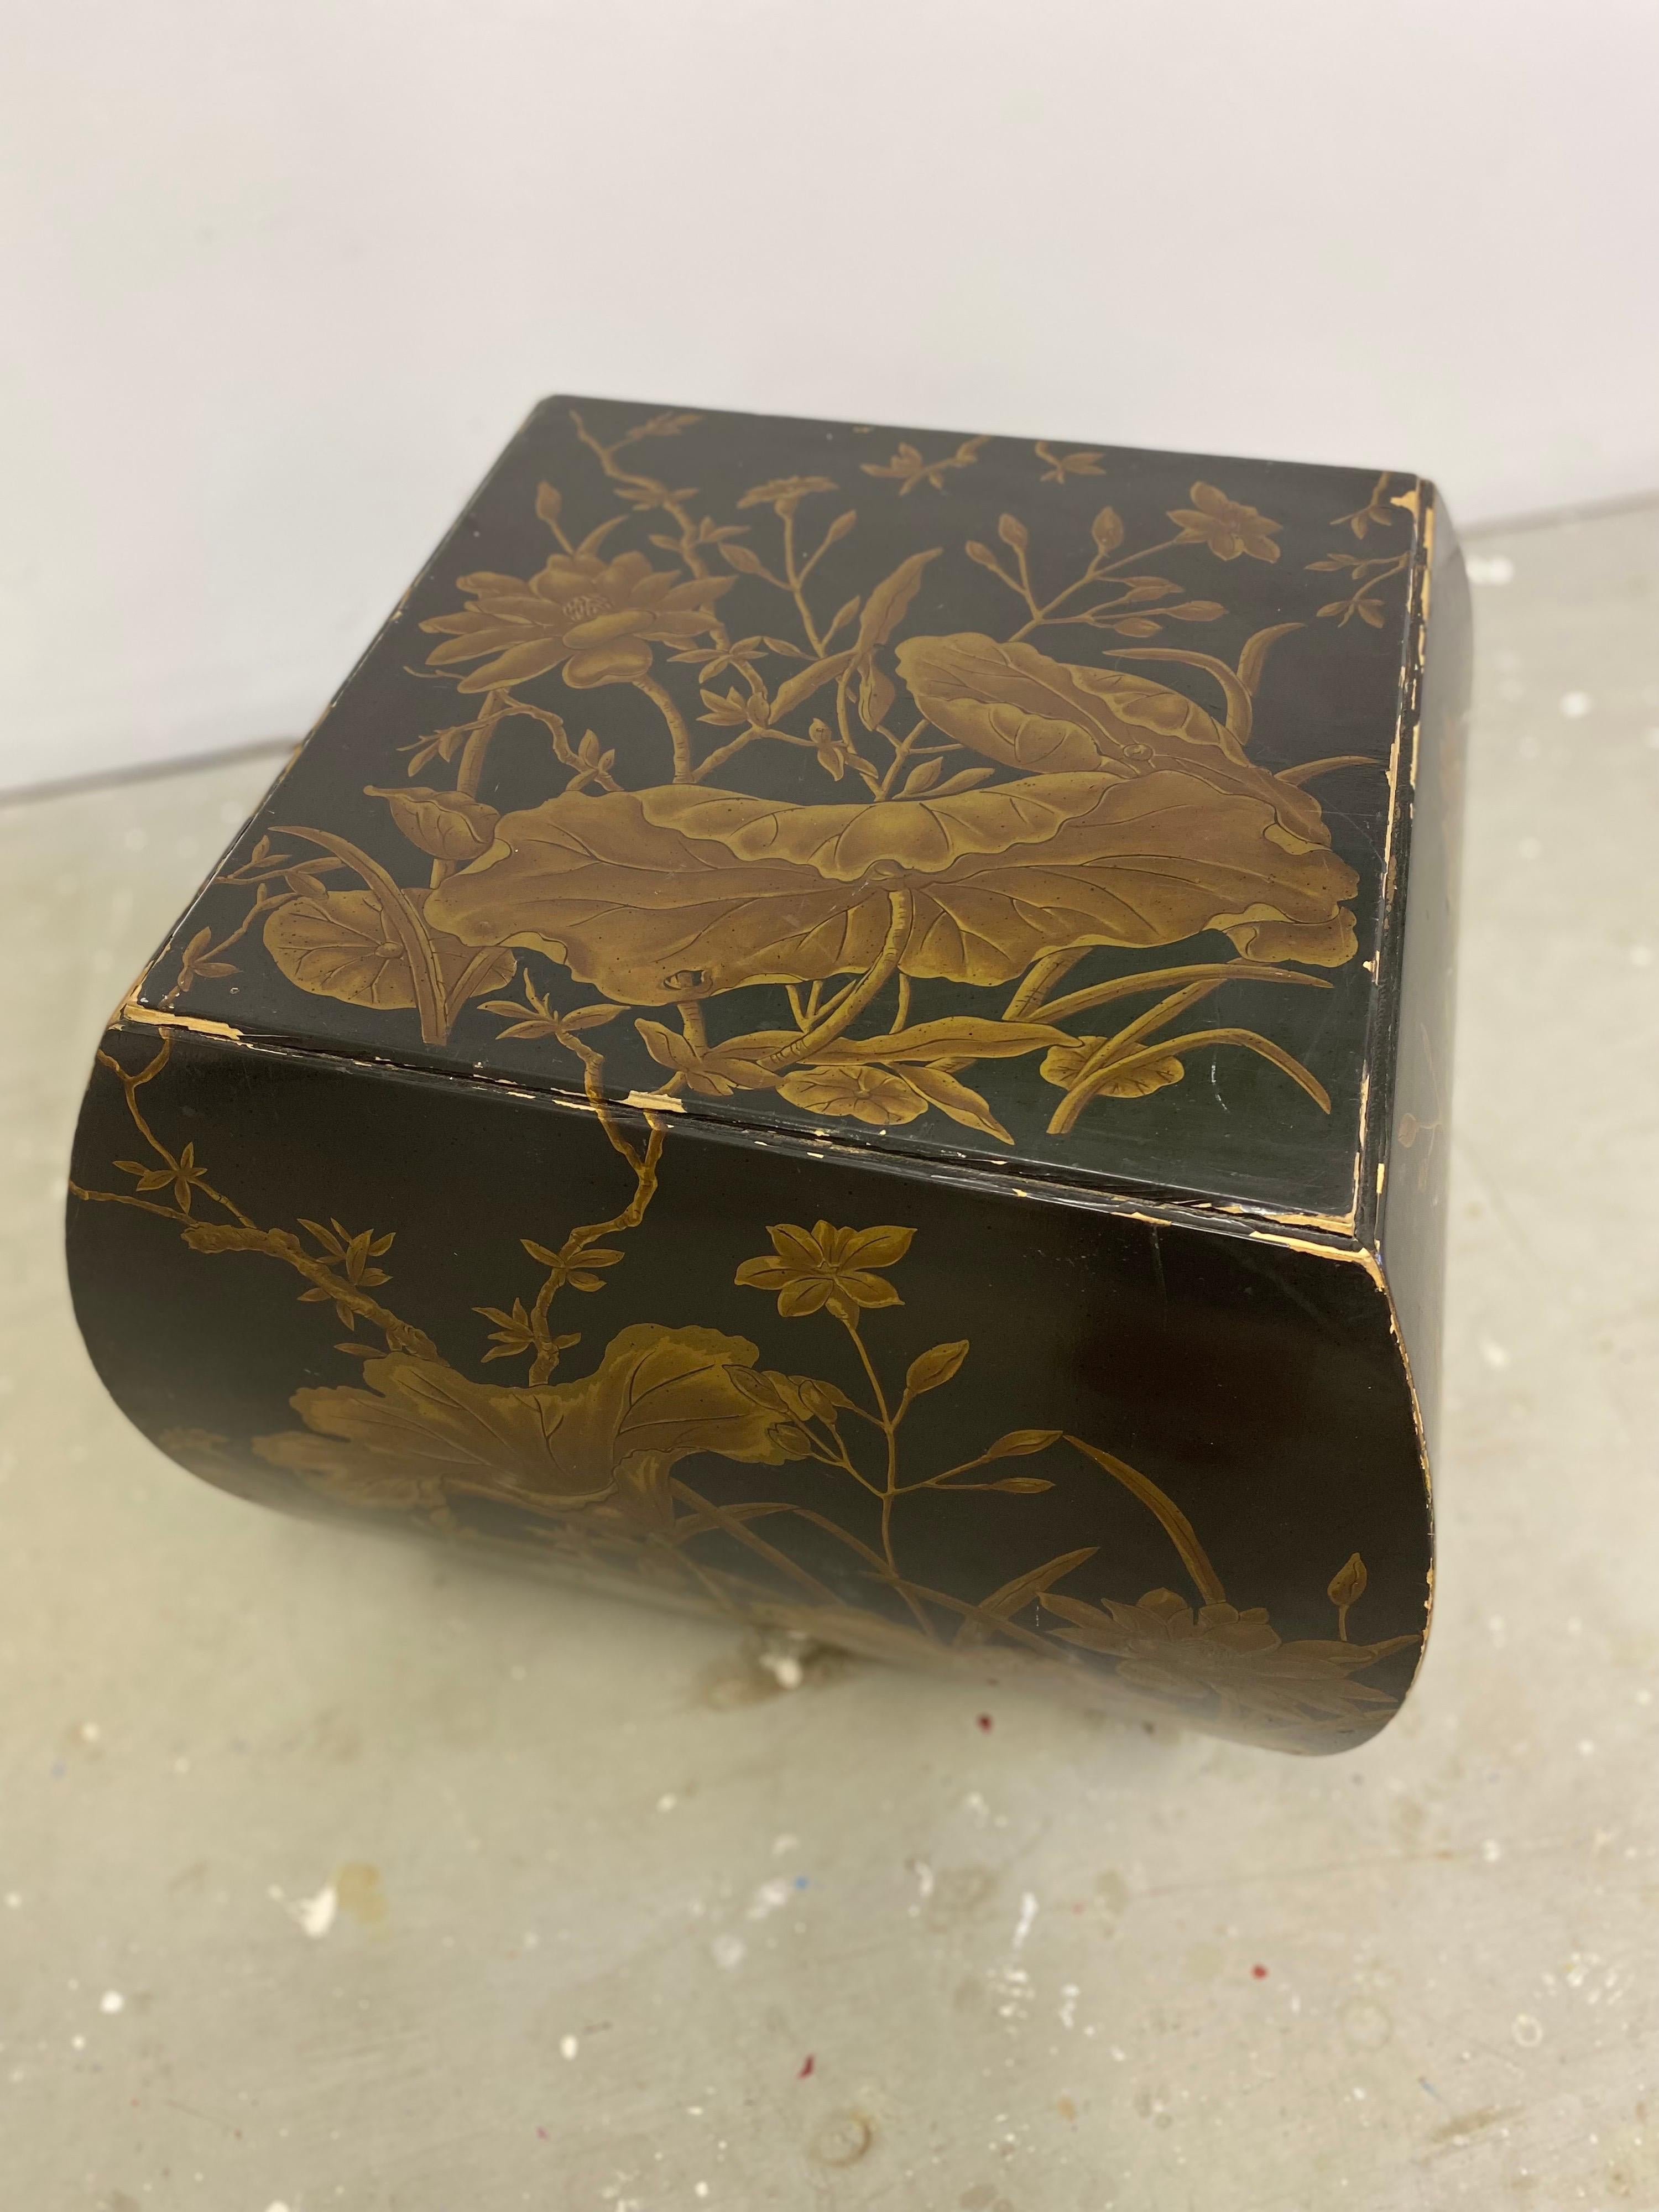 Drexel heritage cube designed by Randy Yancey. Asian inspired cube with gold leaf floral design throughout. Edge wear throughout cube. Overall has a great presence!